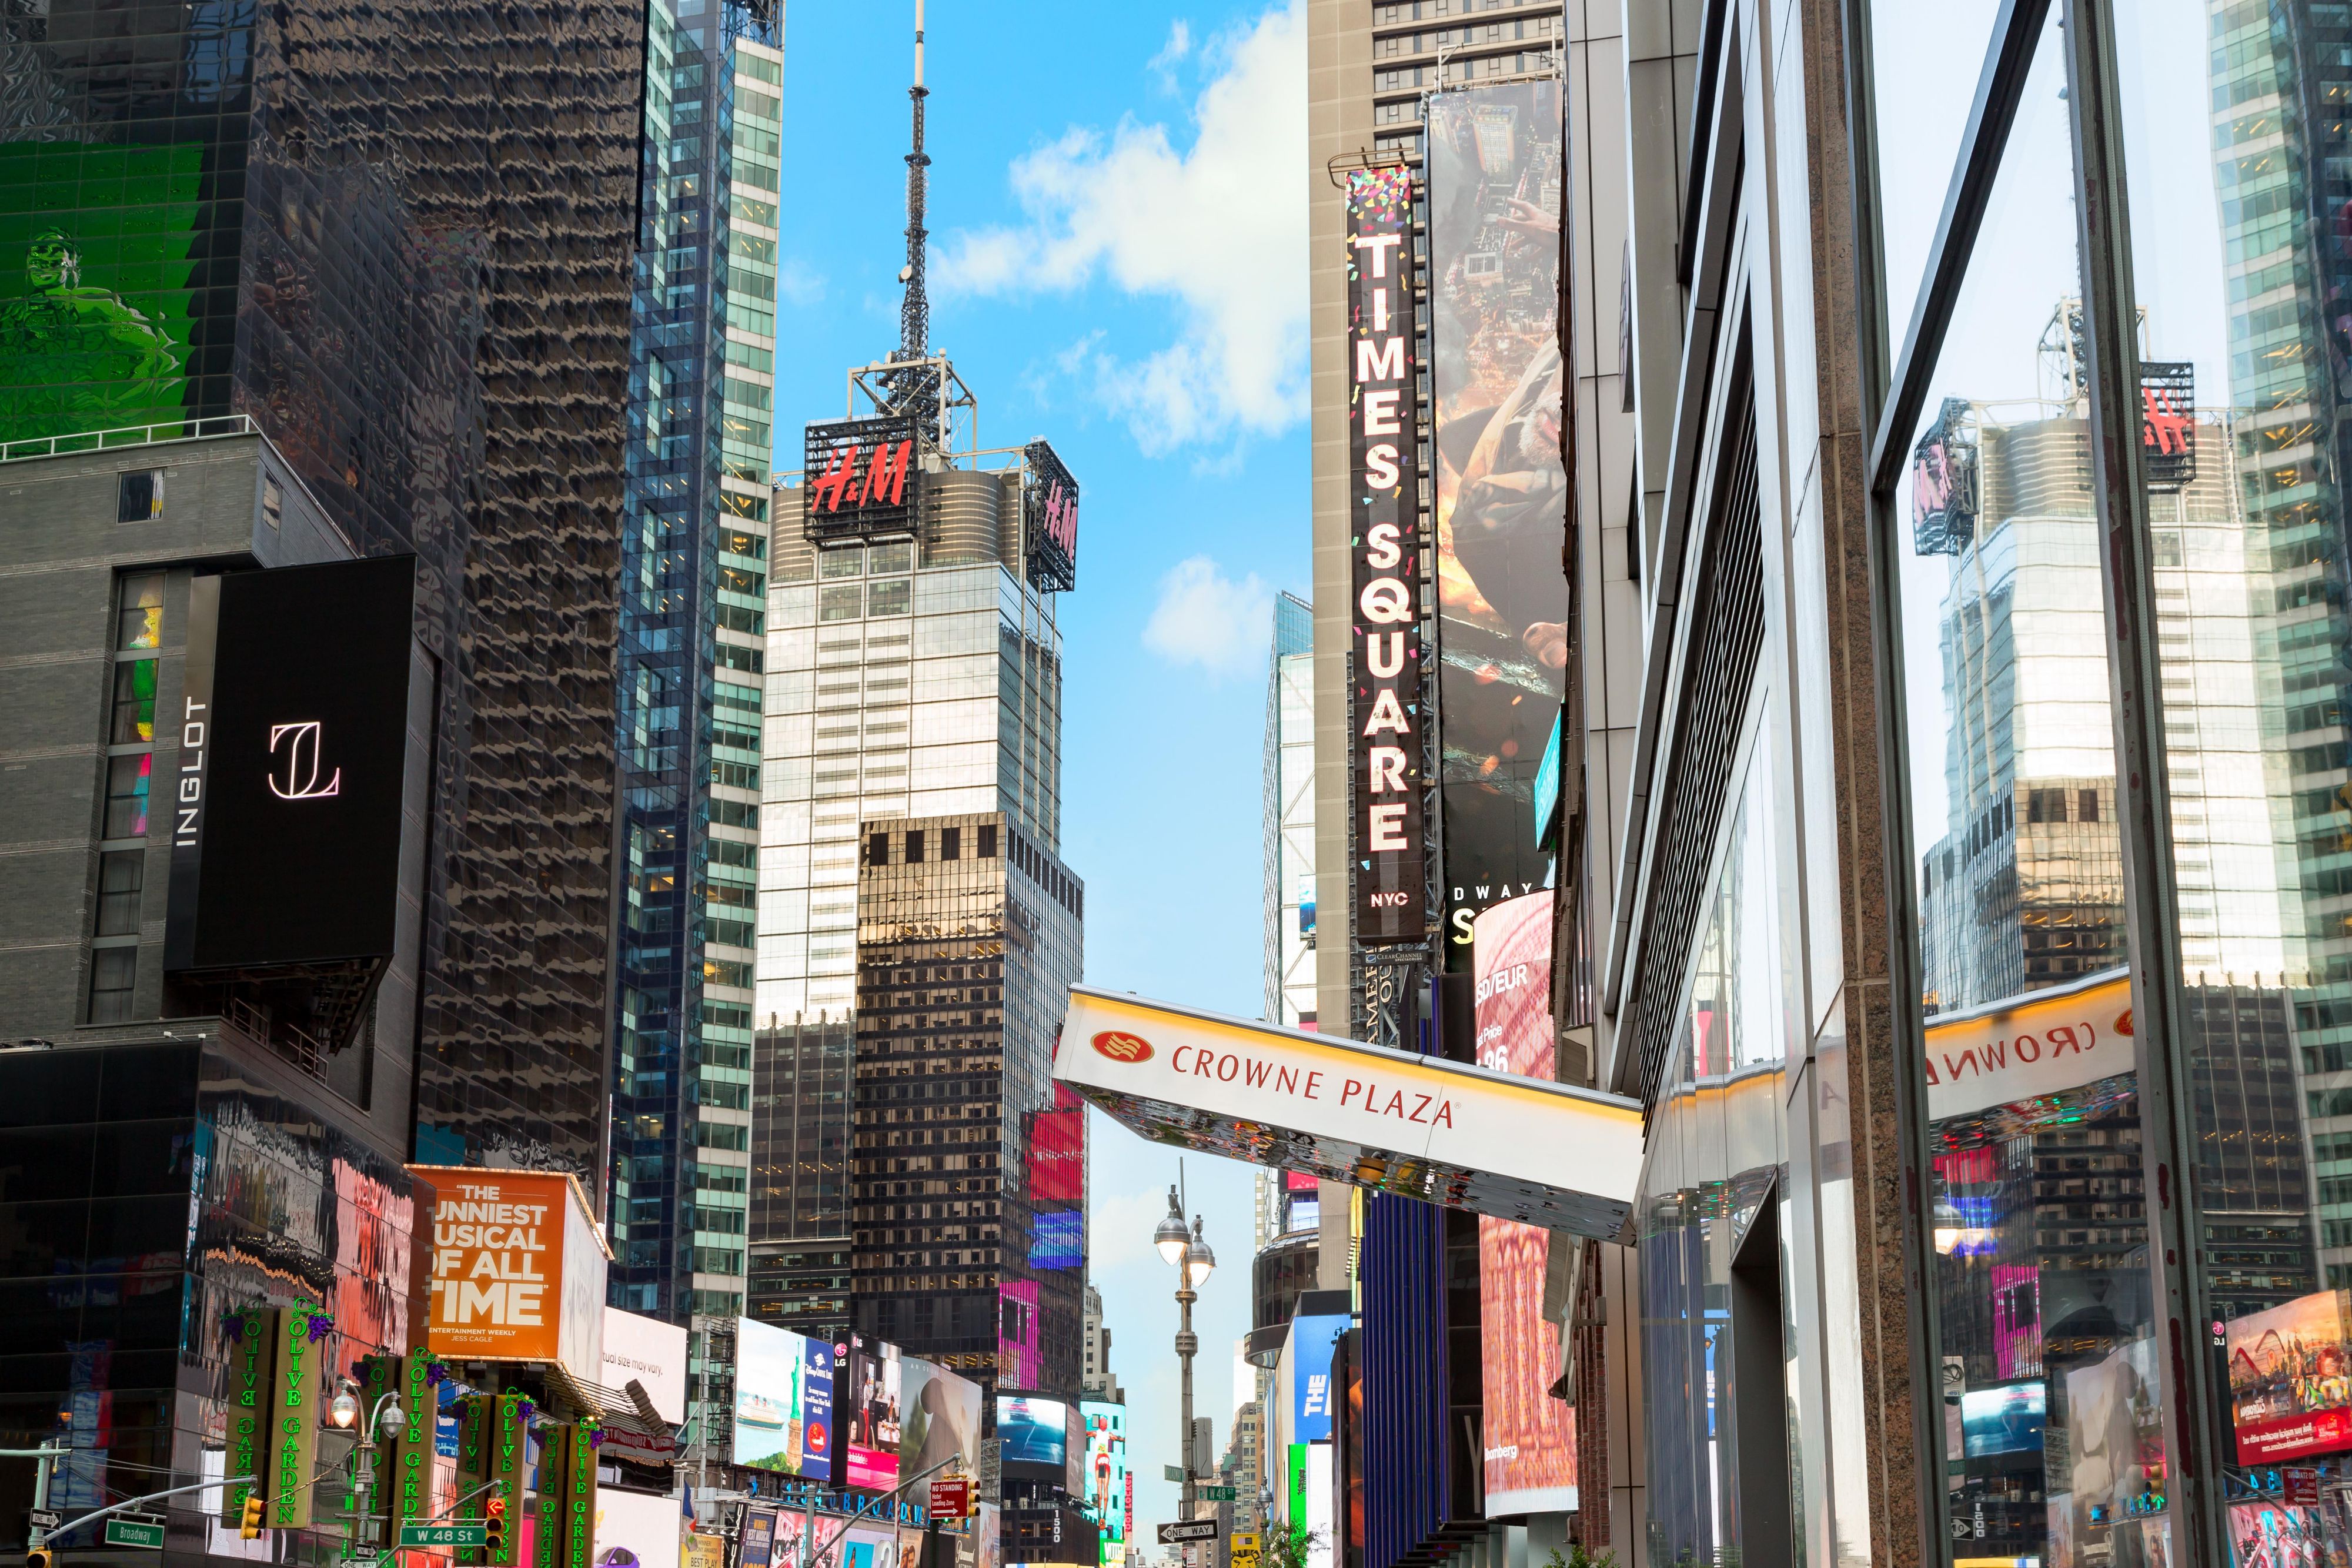 Our front entrance puts you on Broadway in Times Square!